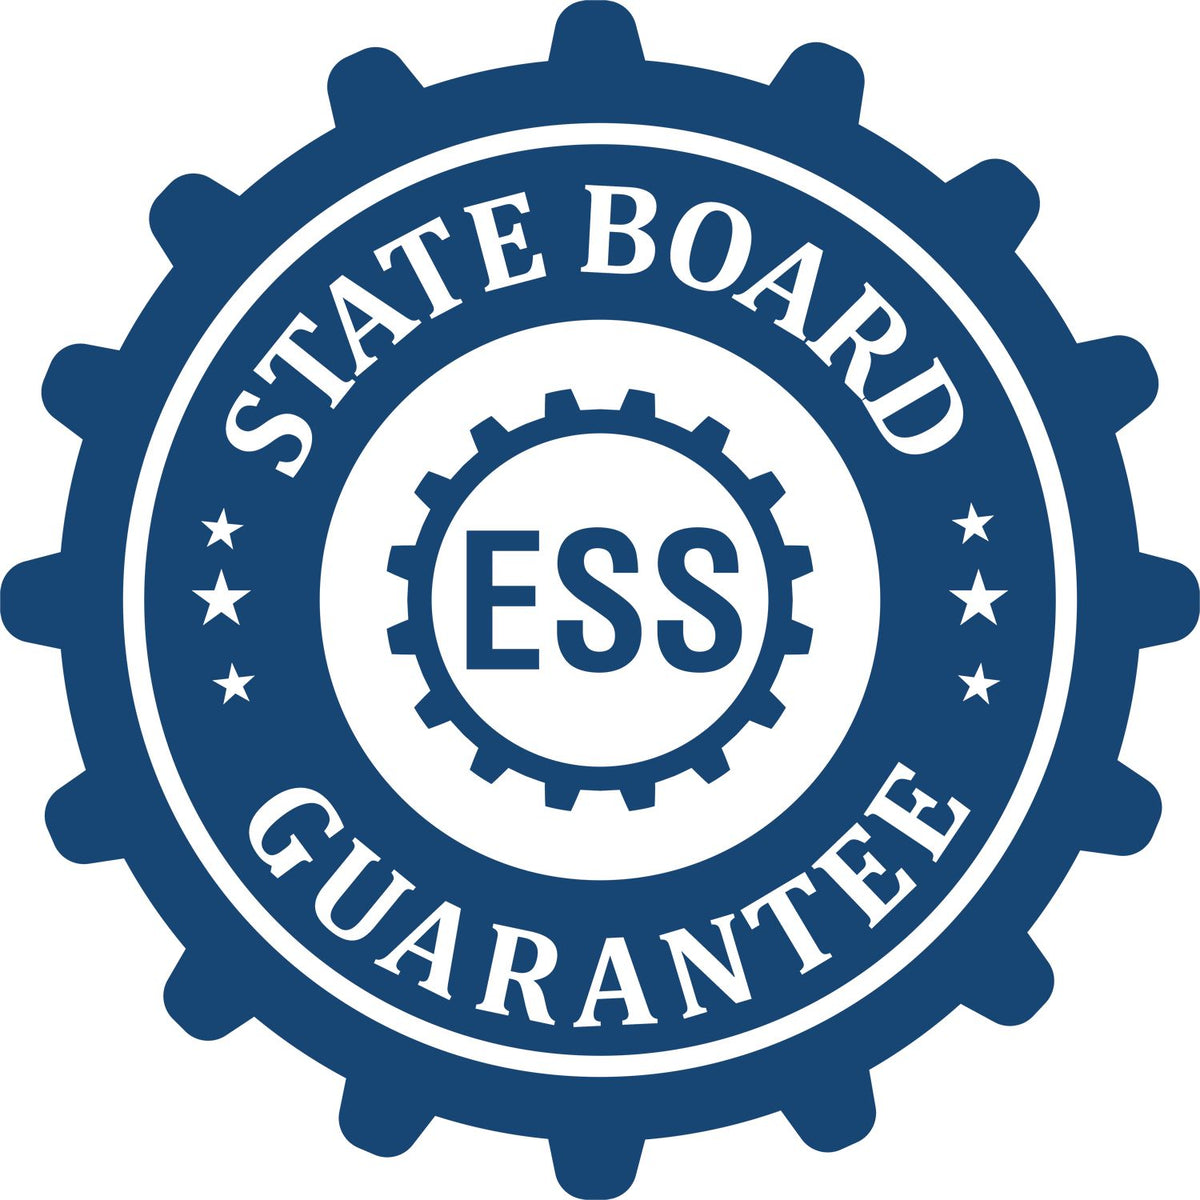 An emblem in a gear shape illustrating a state board guarantee for the Hybrid Texas Land Surveyor Seal